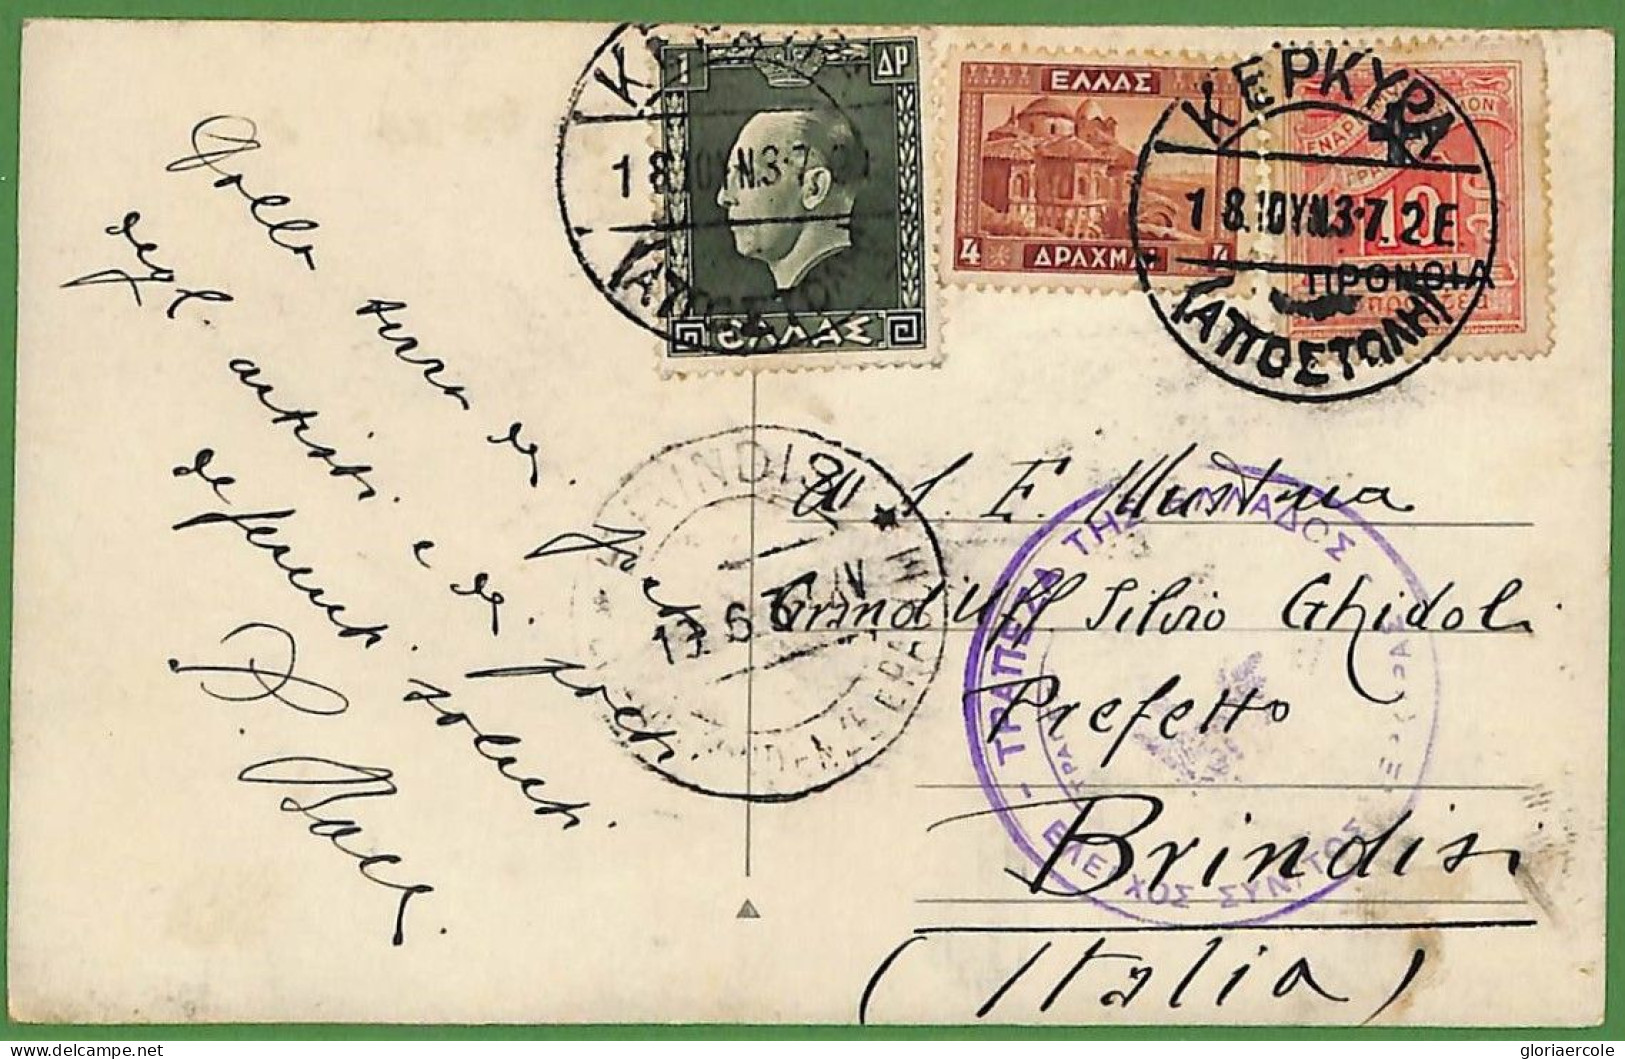 Ad0898 - GREECE - Postal History - Overprinted Stamp On CENSORED CARD To ITALY 1937 - Covers & Documents